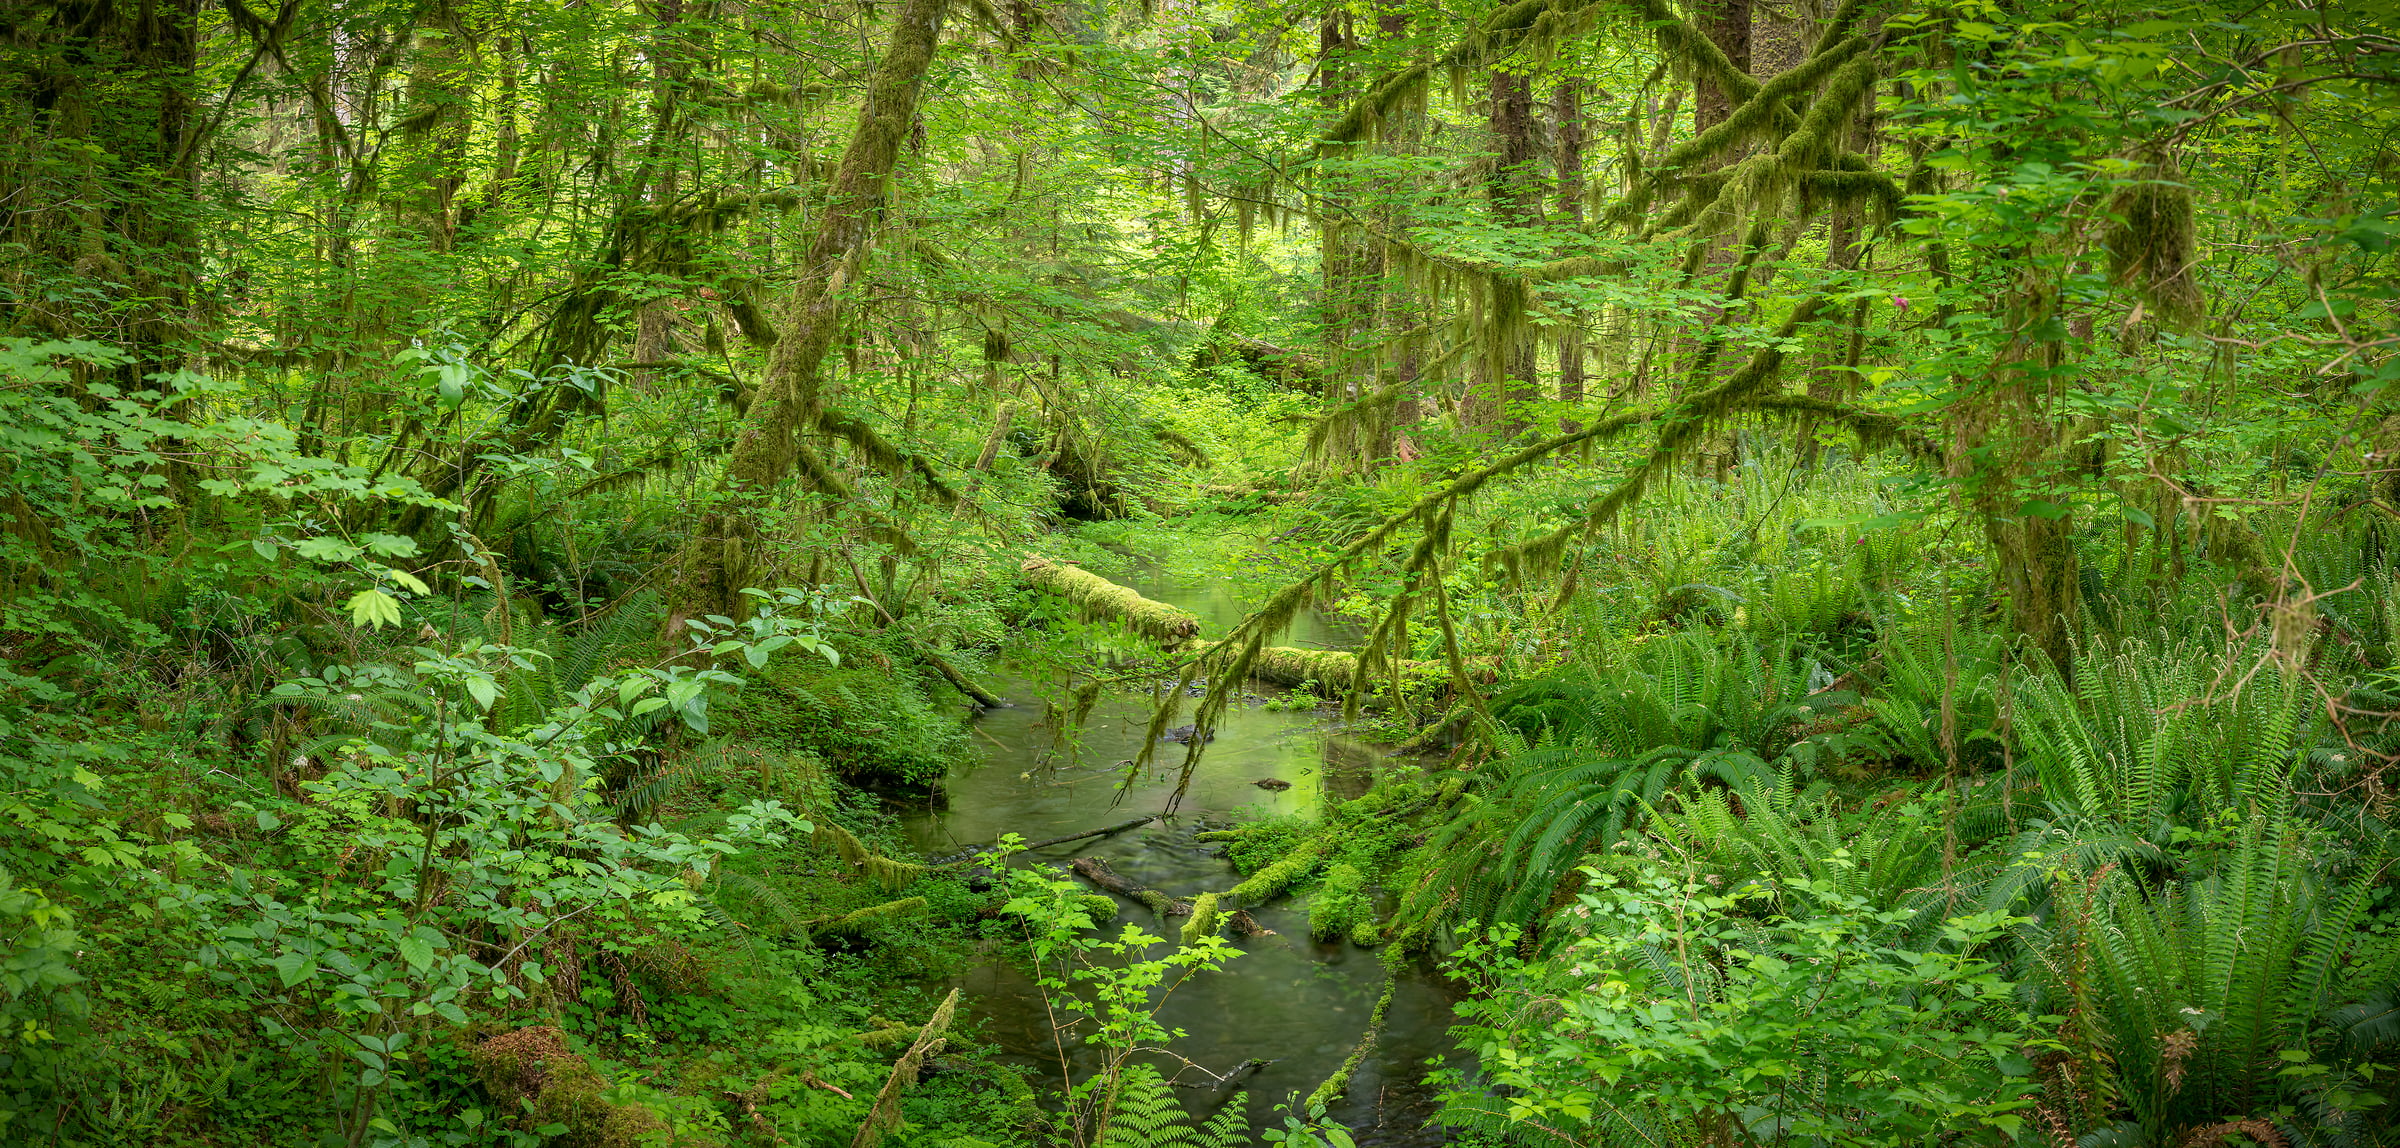 200 megapixels! A very high resolution, large-format VAST photo print of a lush, green rainforest; nature photograph created by Greg Probst in Hoh Rainforest, Olympic National Park, Washington.